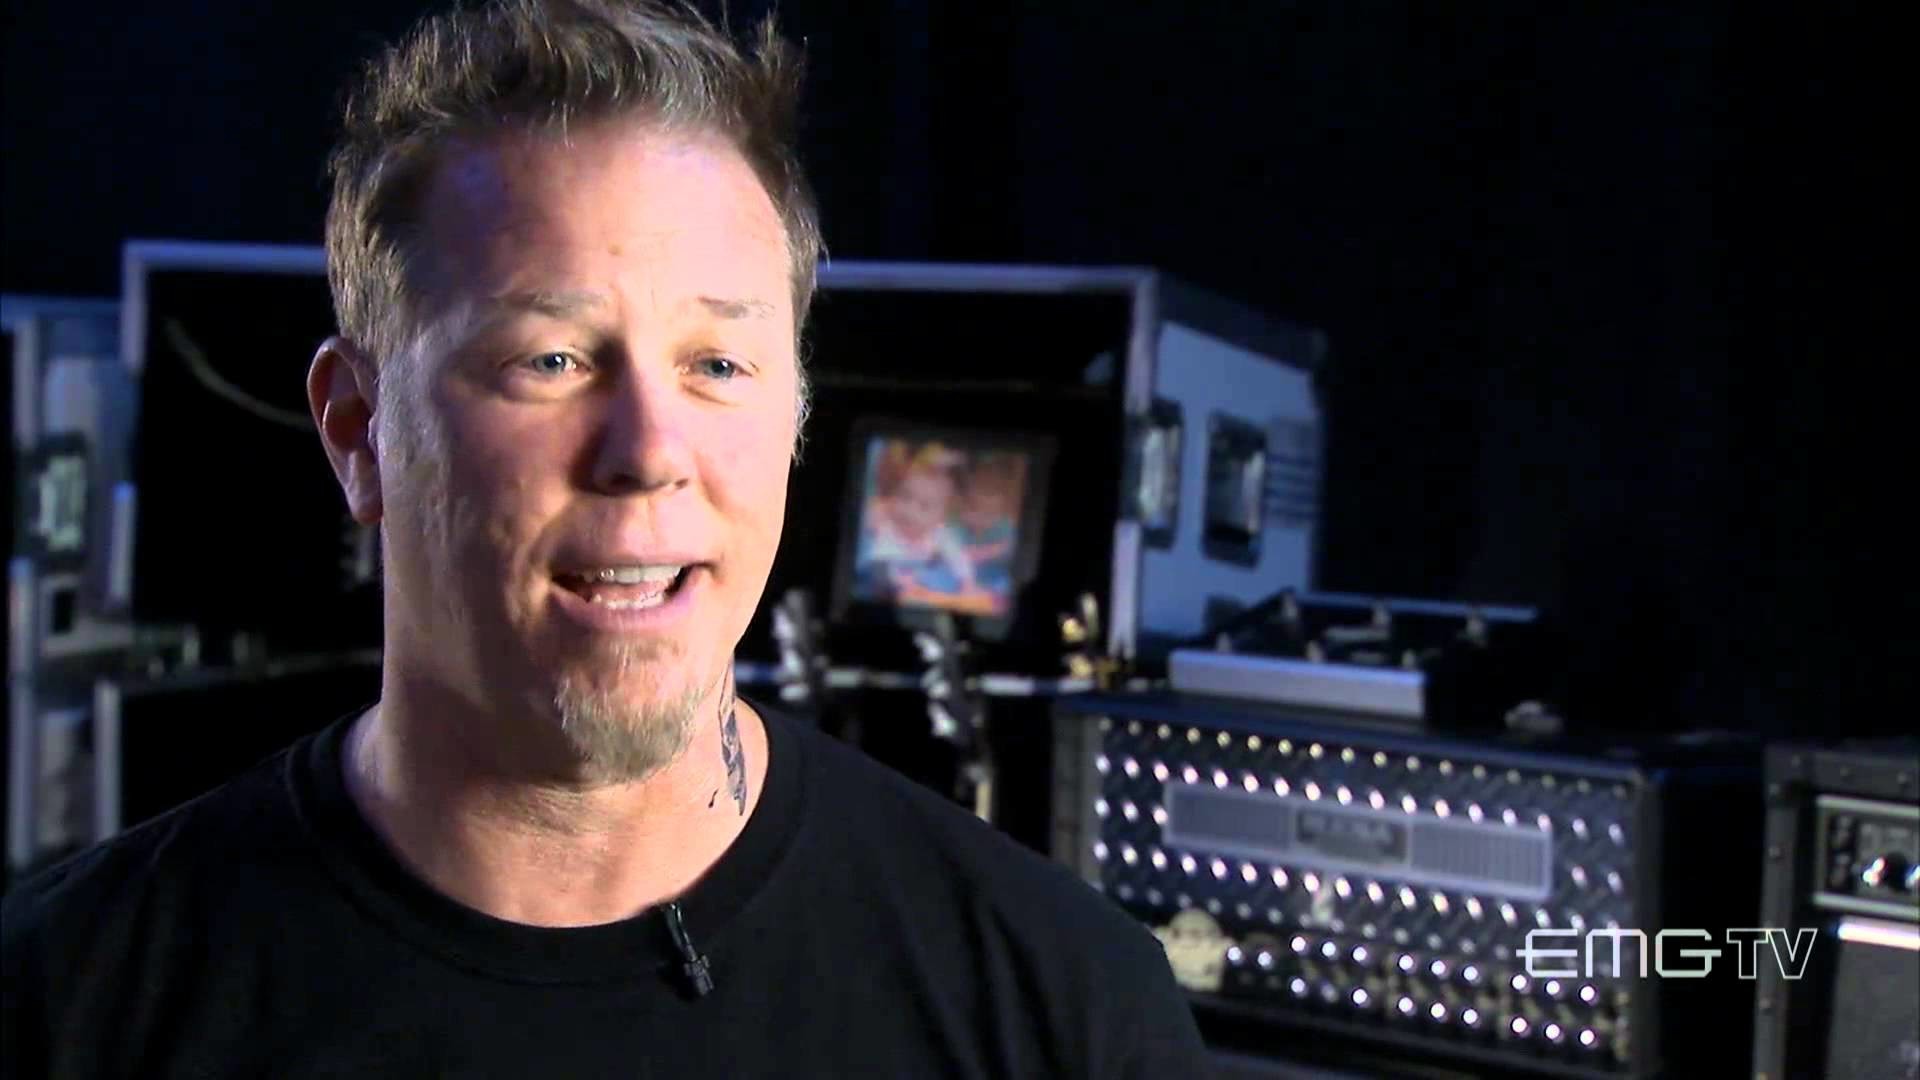 1920x1080 James Hetfield of Metallica talks about getting his signature tone with  EMGtv - YouTube